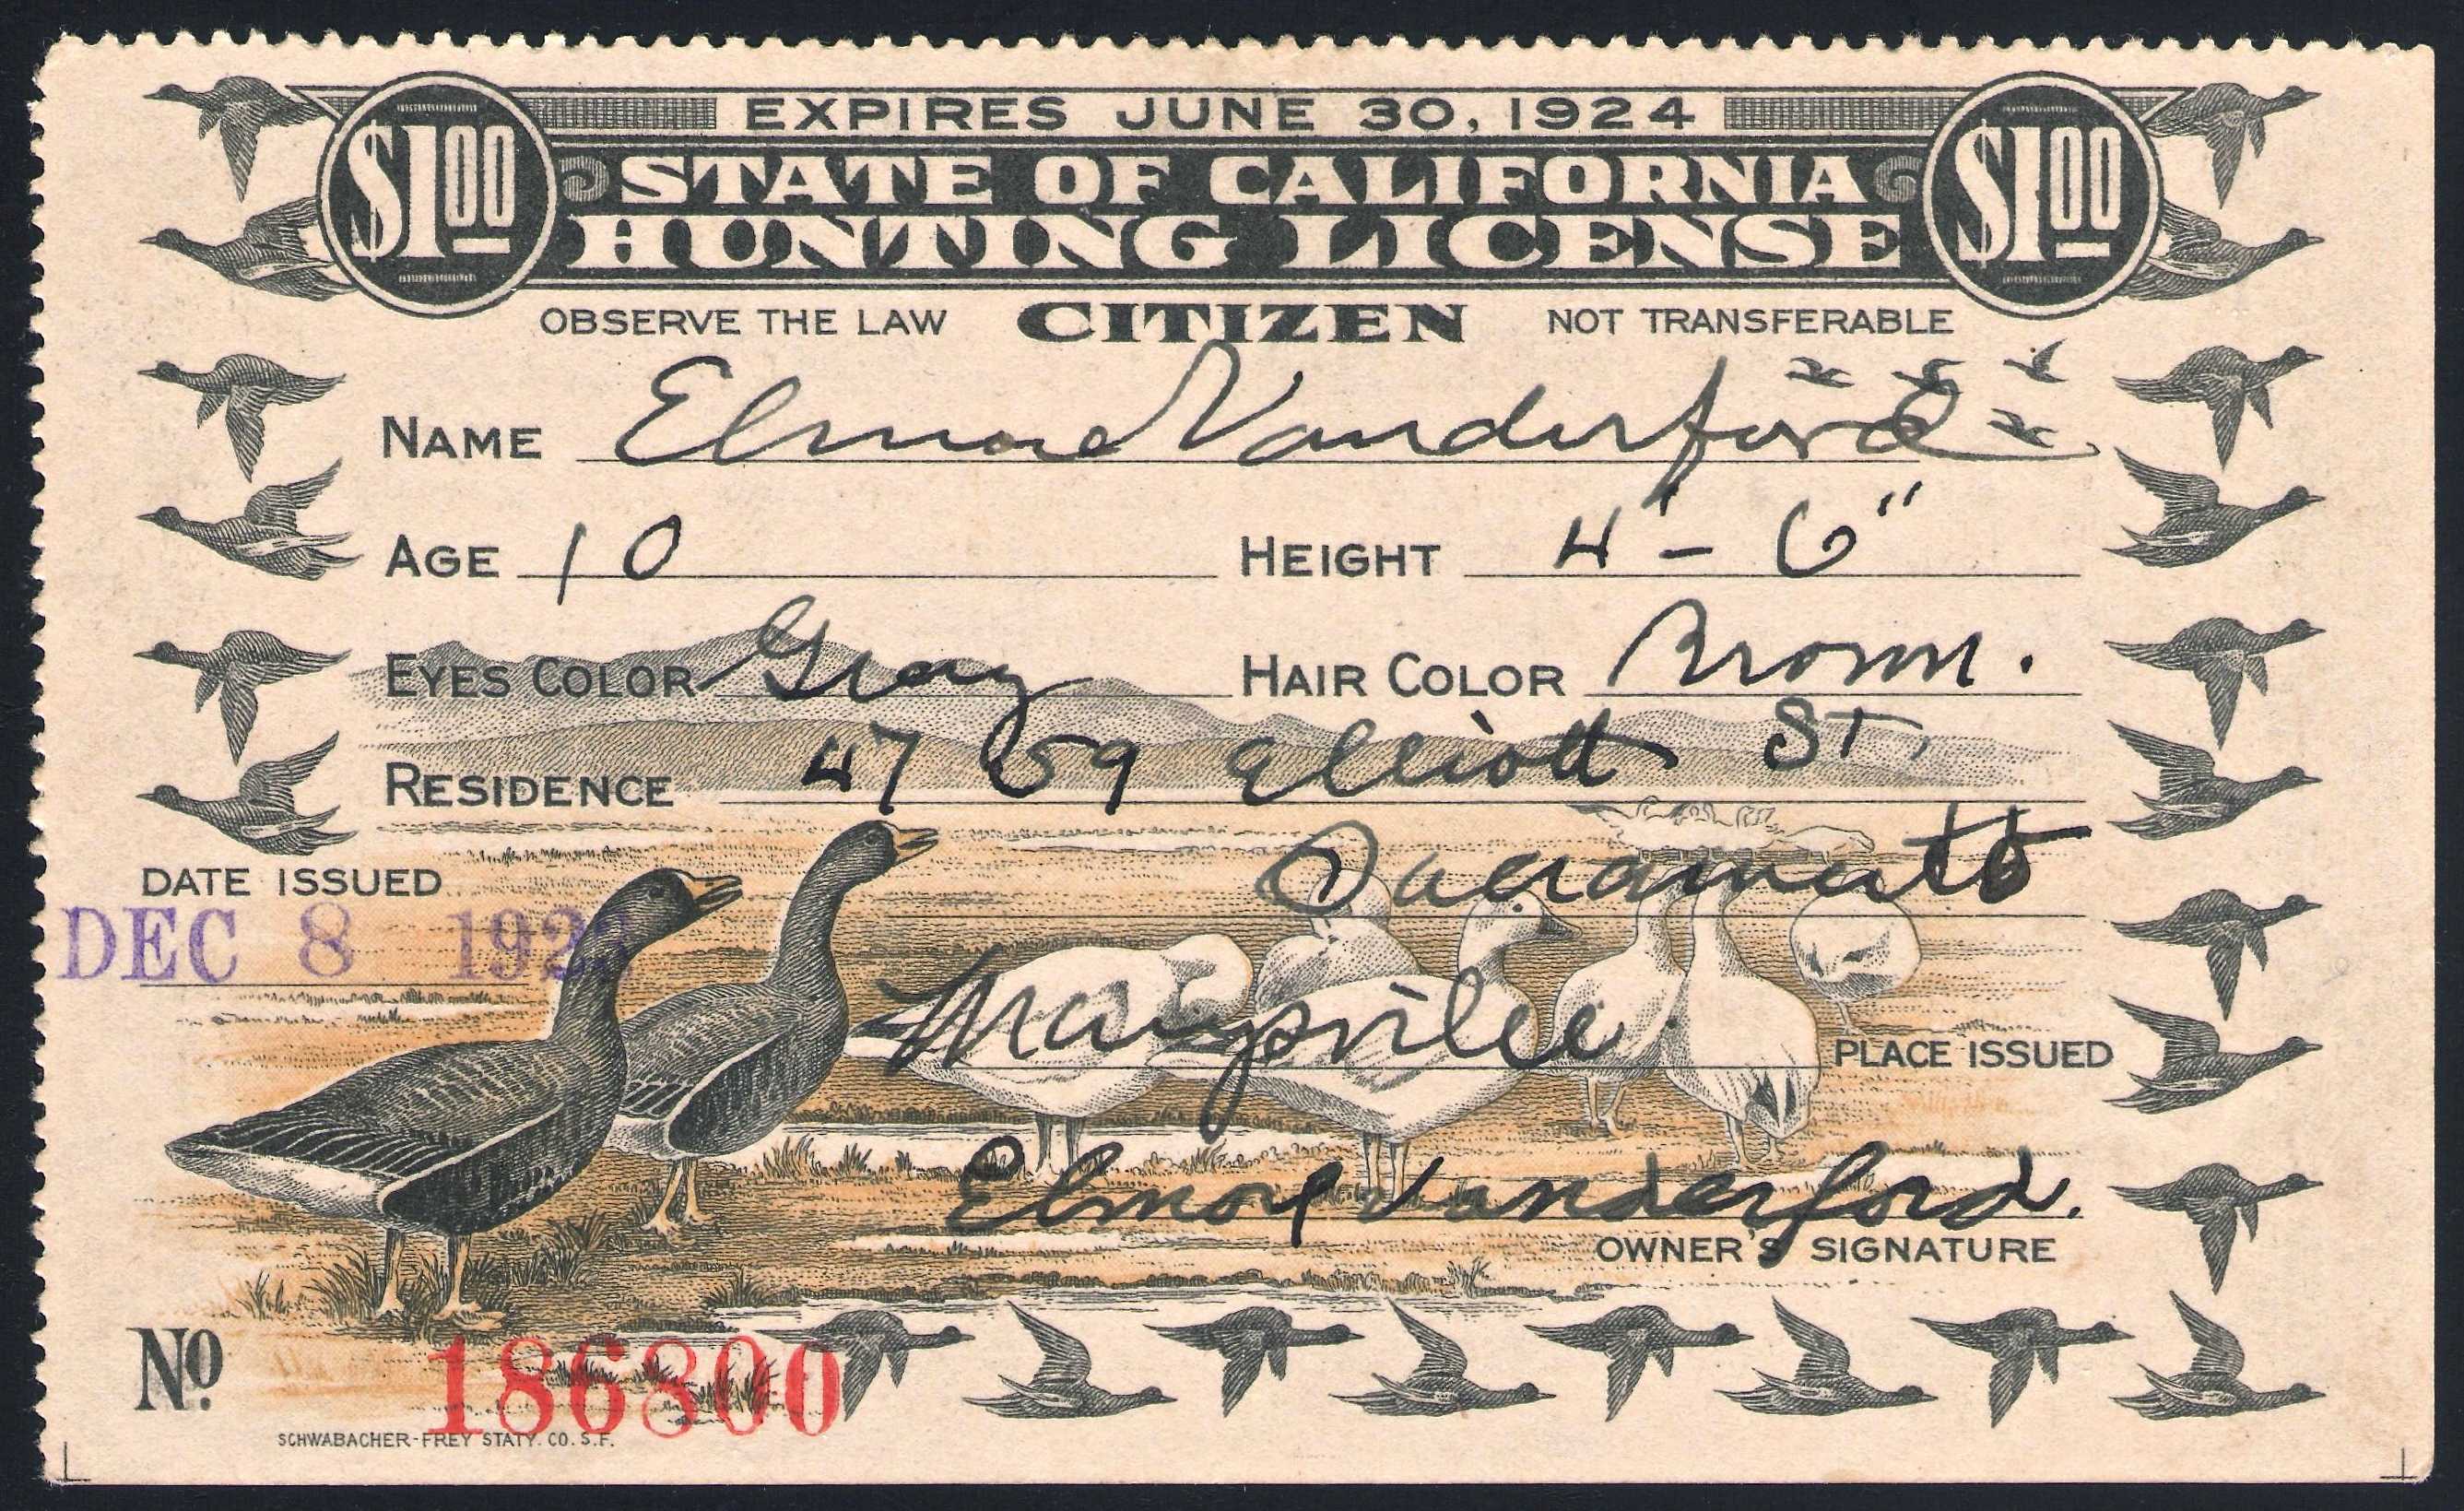 E.L. Vanderford's First Hunting License - Age 10